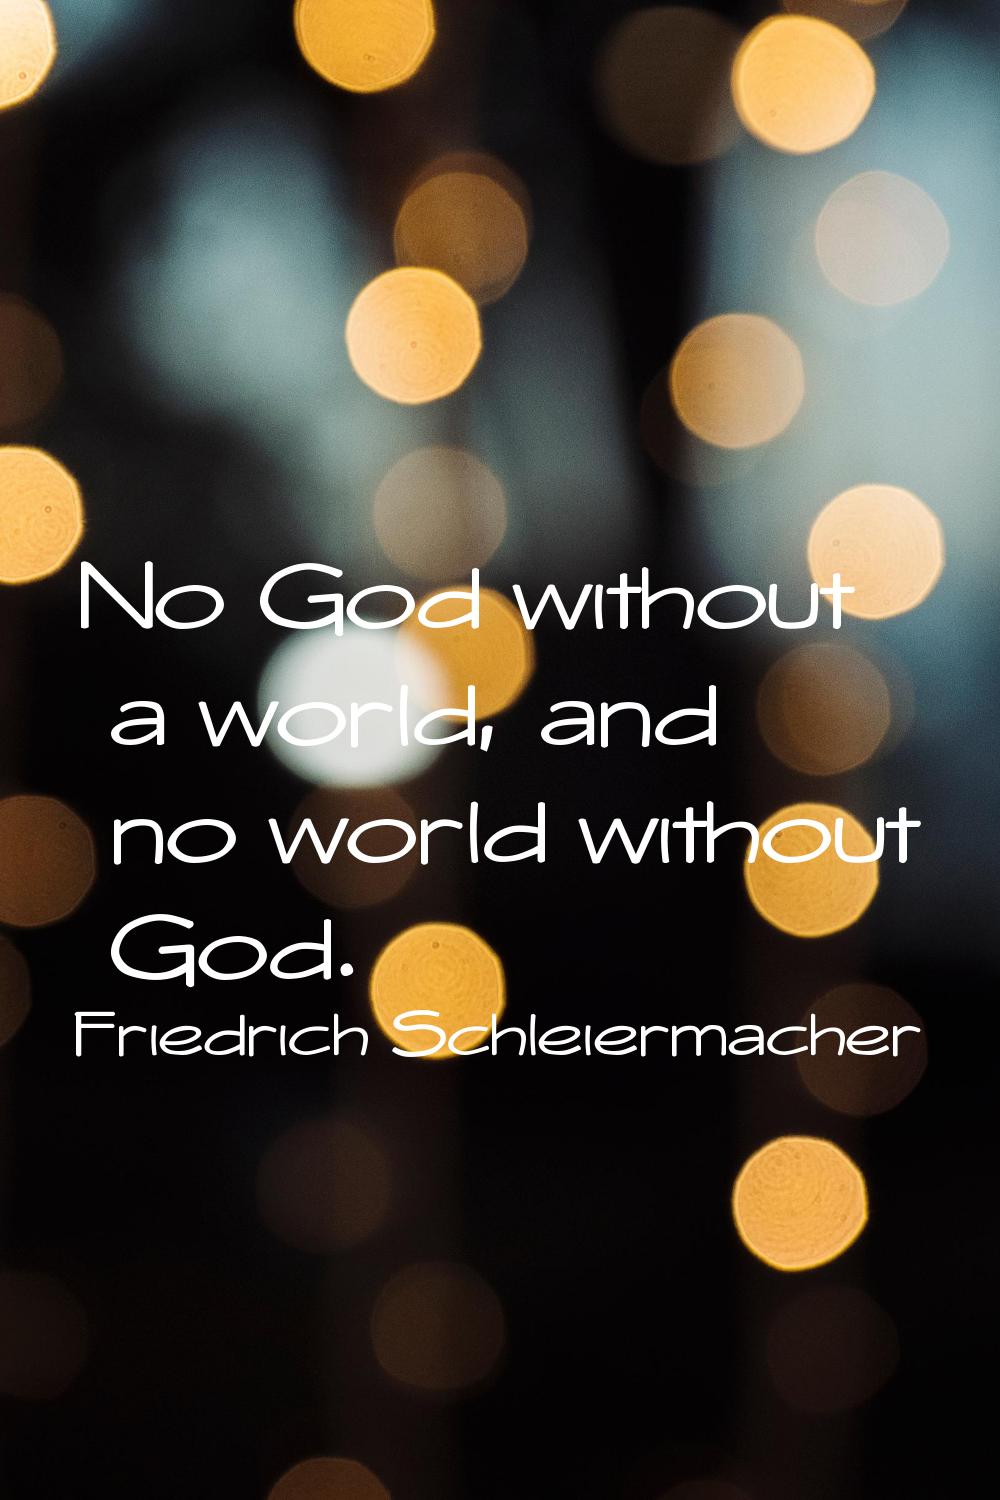 No God without a world, and no world without God.